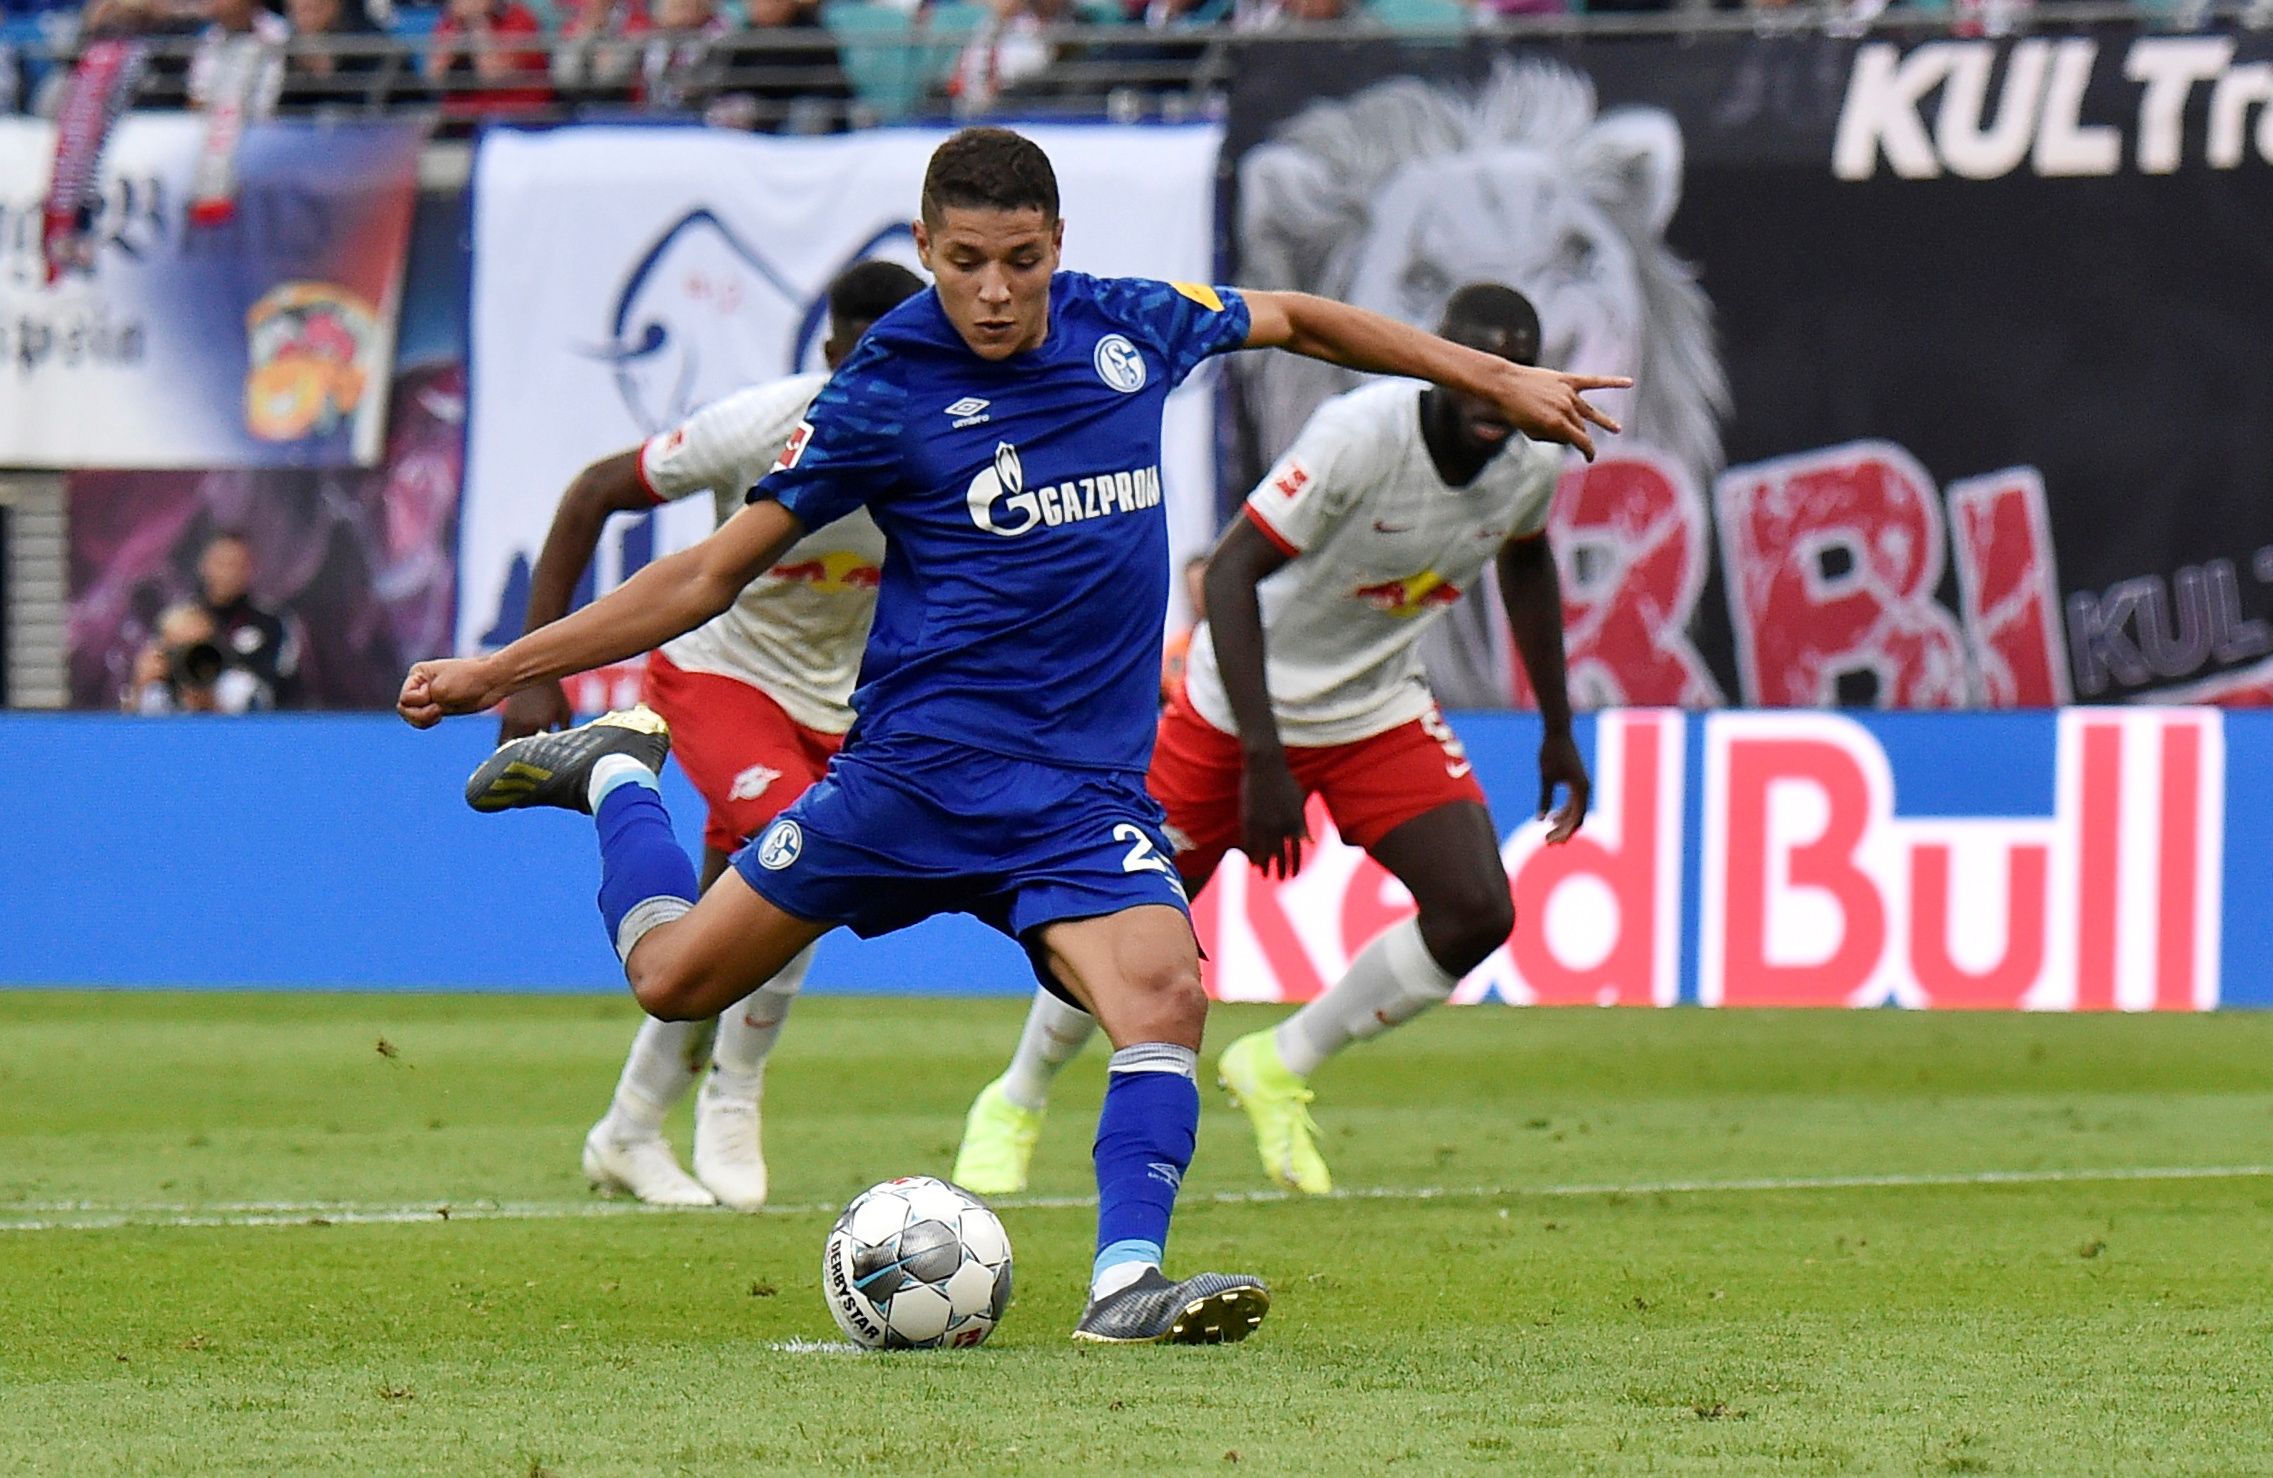 Soccer Football - Bundesliga - RB Leipzig v Schalke 04 - Red Bull Arena, Leipzig, Germany - September 28, 2019  Schalke 04's Amine Harit scores their first goal from the penalty spot                REUTERS/Matthias Rietschel  DFL regulations prohibit any use of photographs as image sequences and/or quasi-video